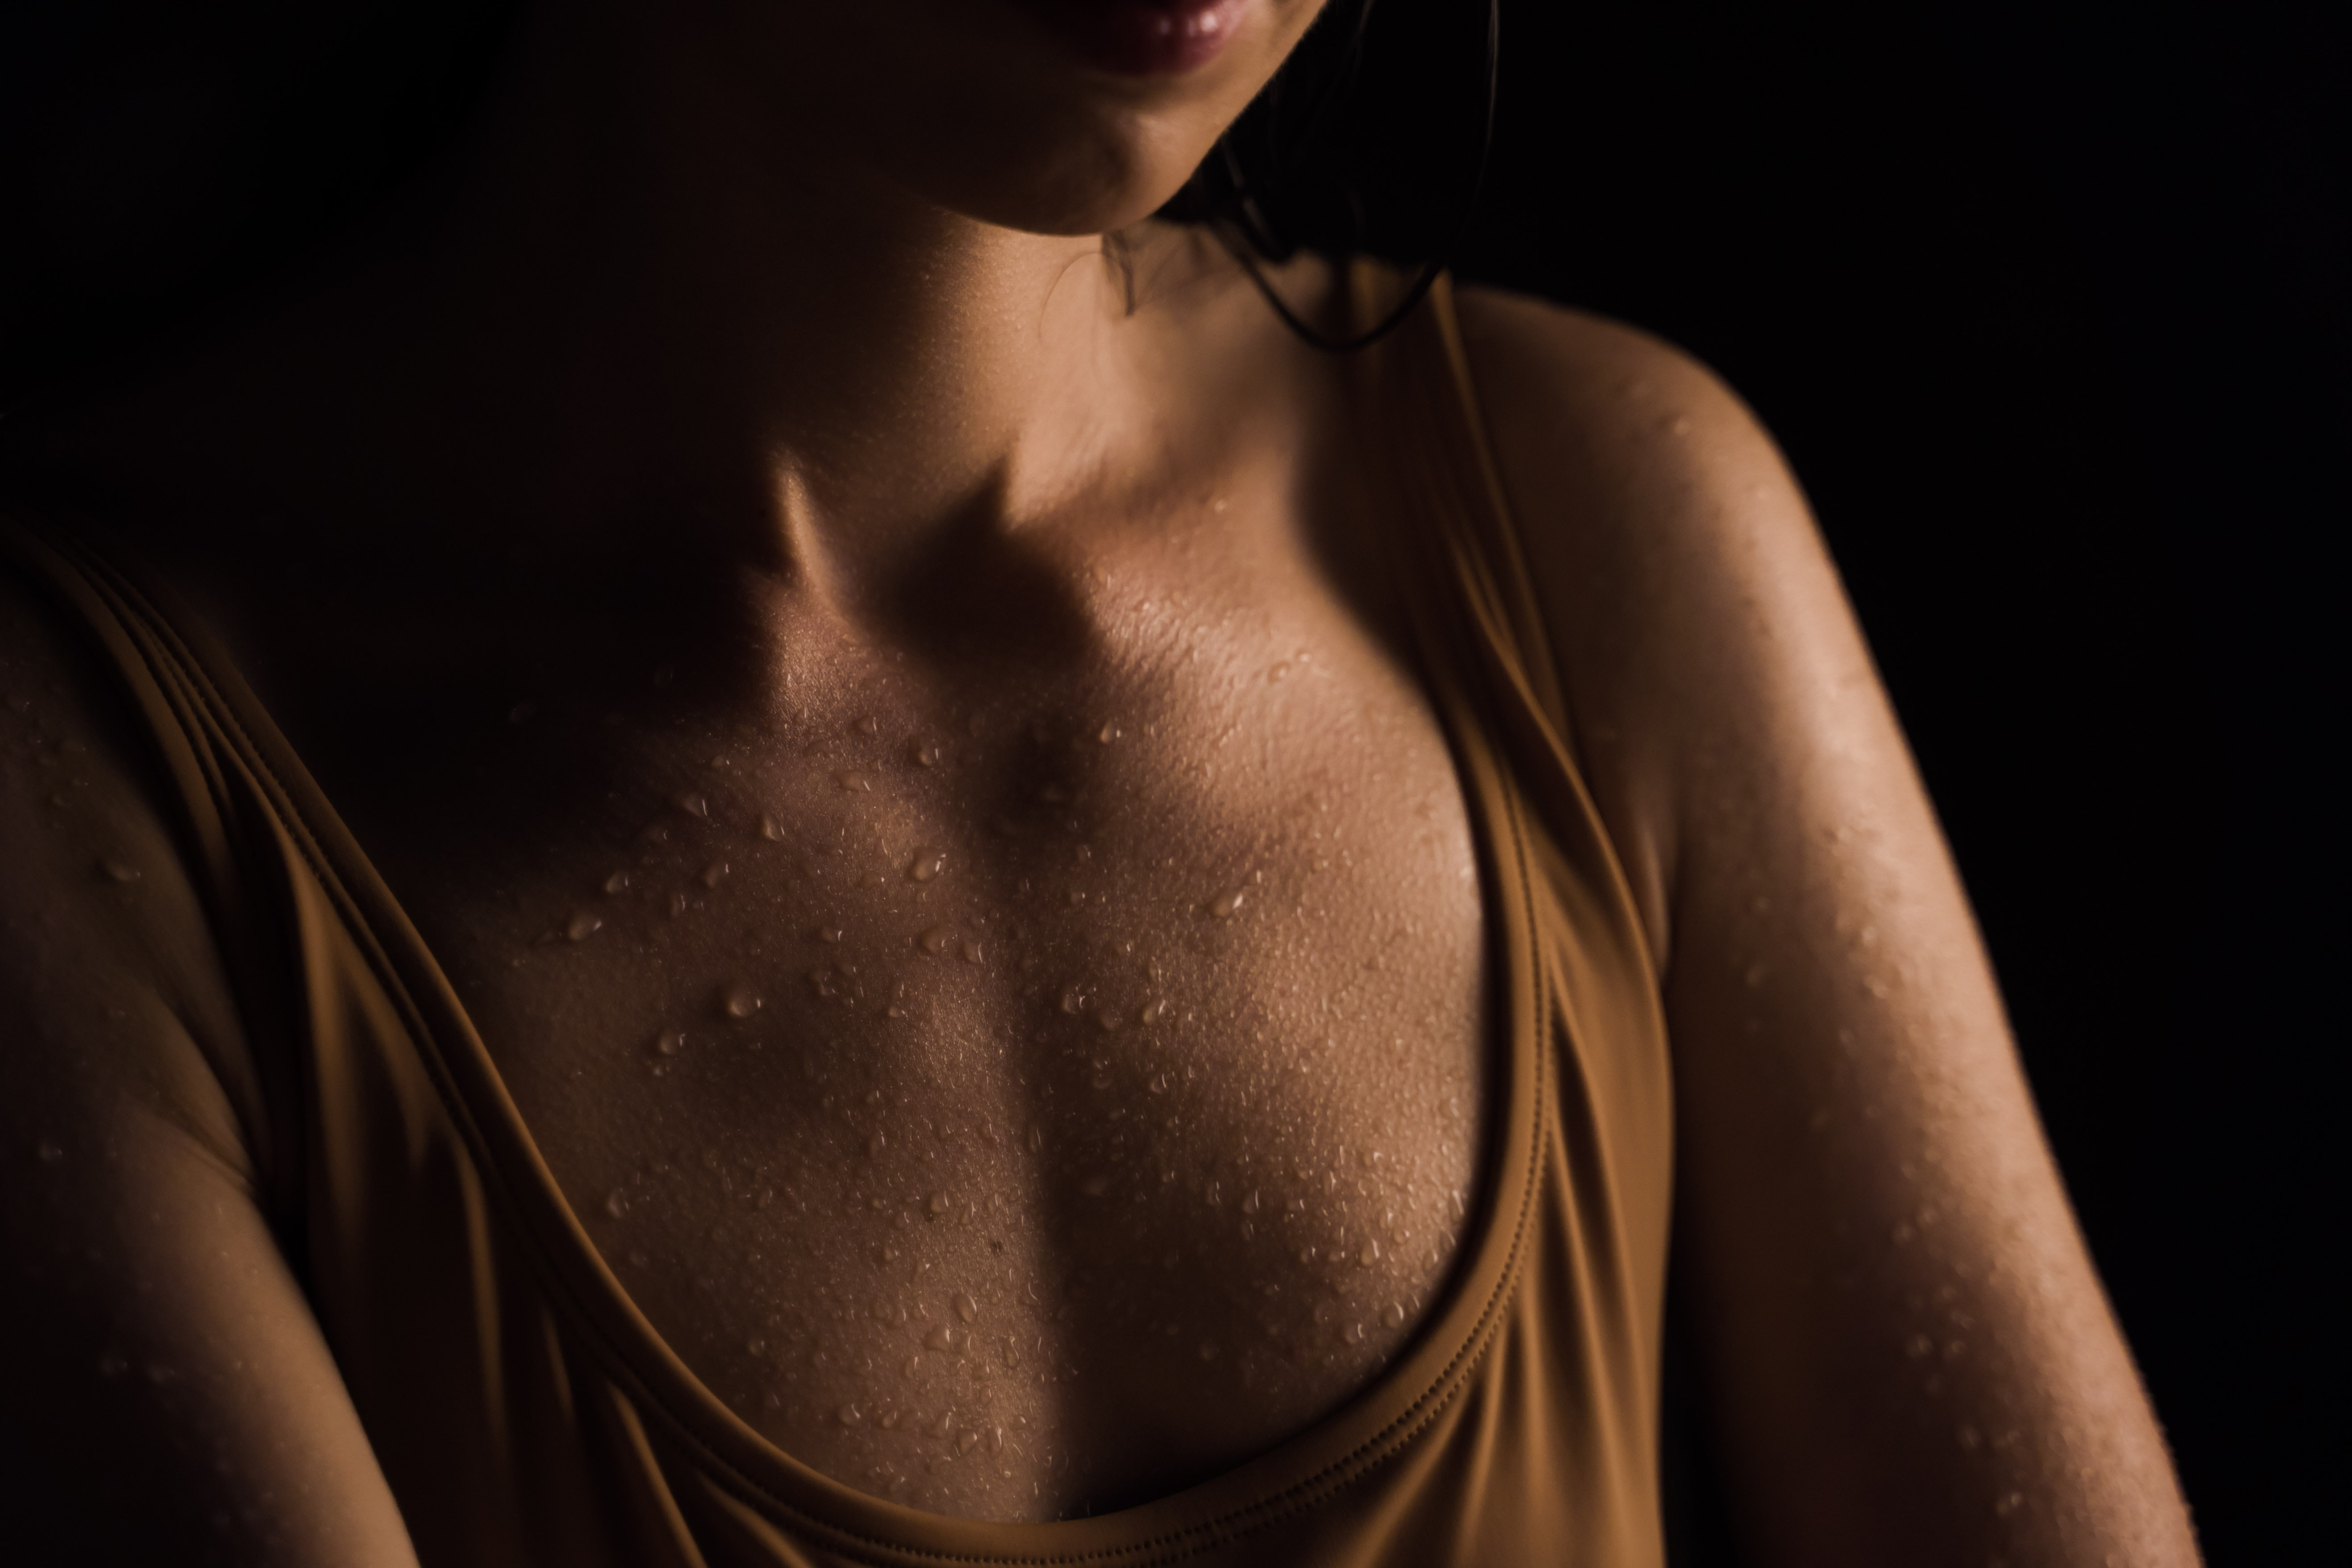 Sweating is one of the amazing health benefits of a sauna